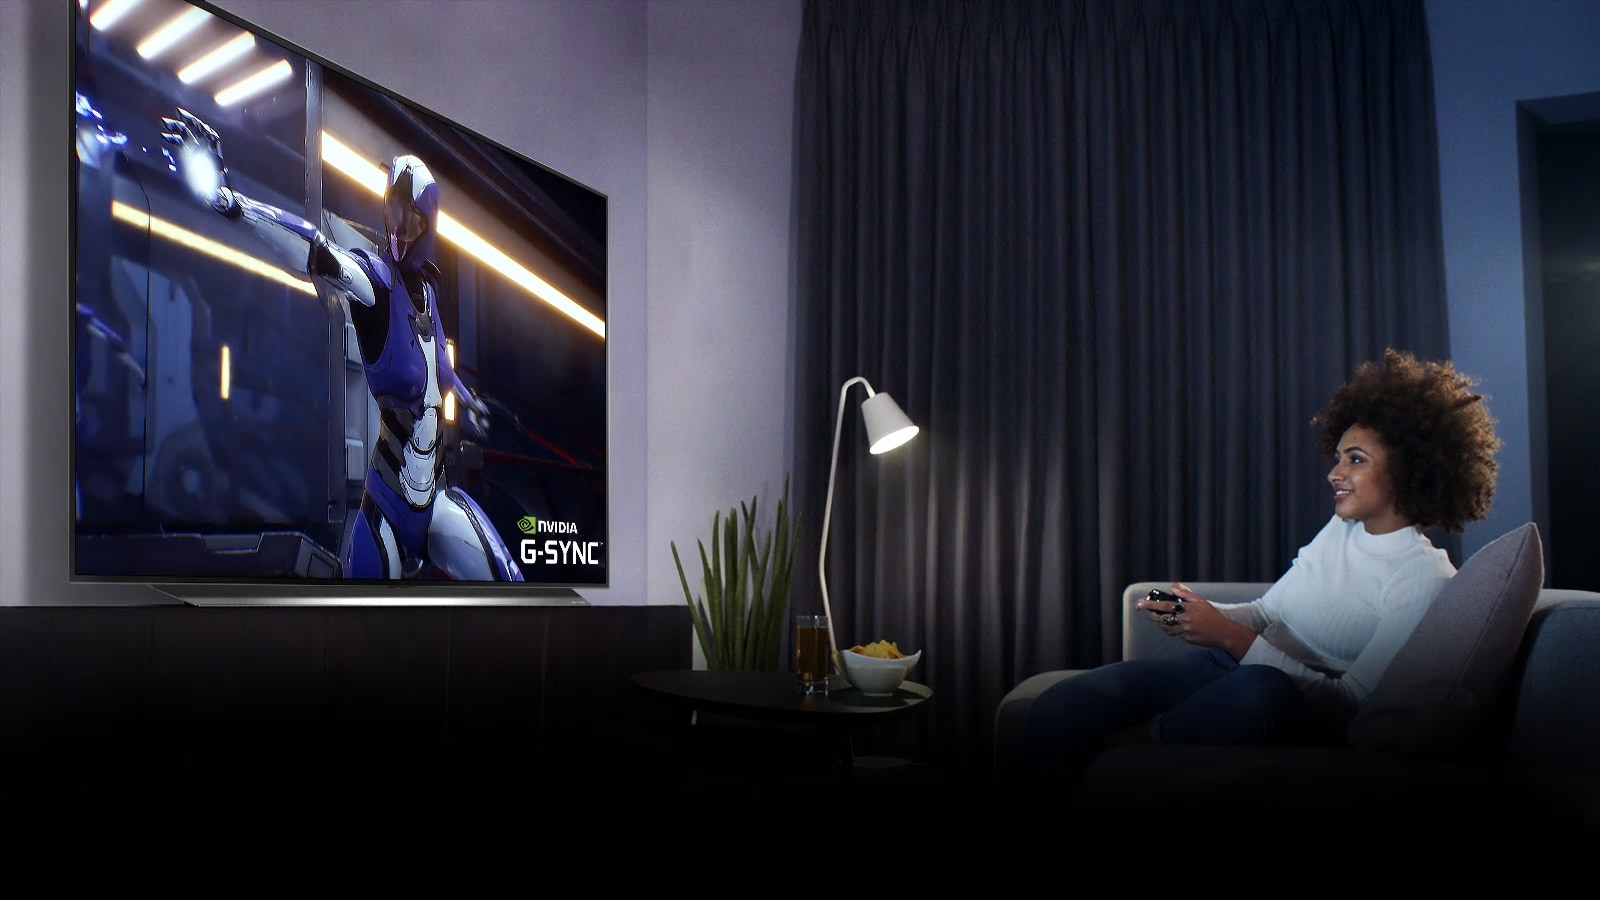 OLED TV completes your dream gaming setup